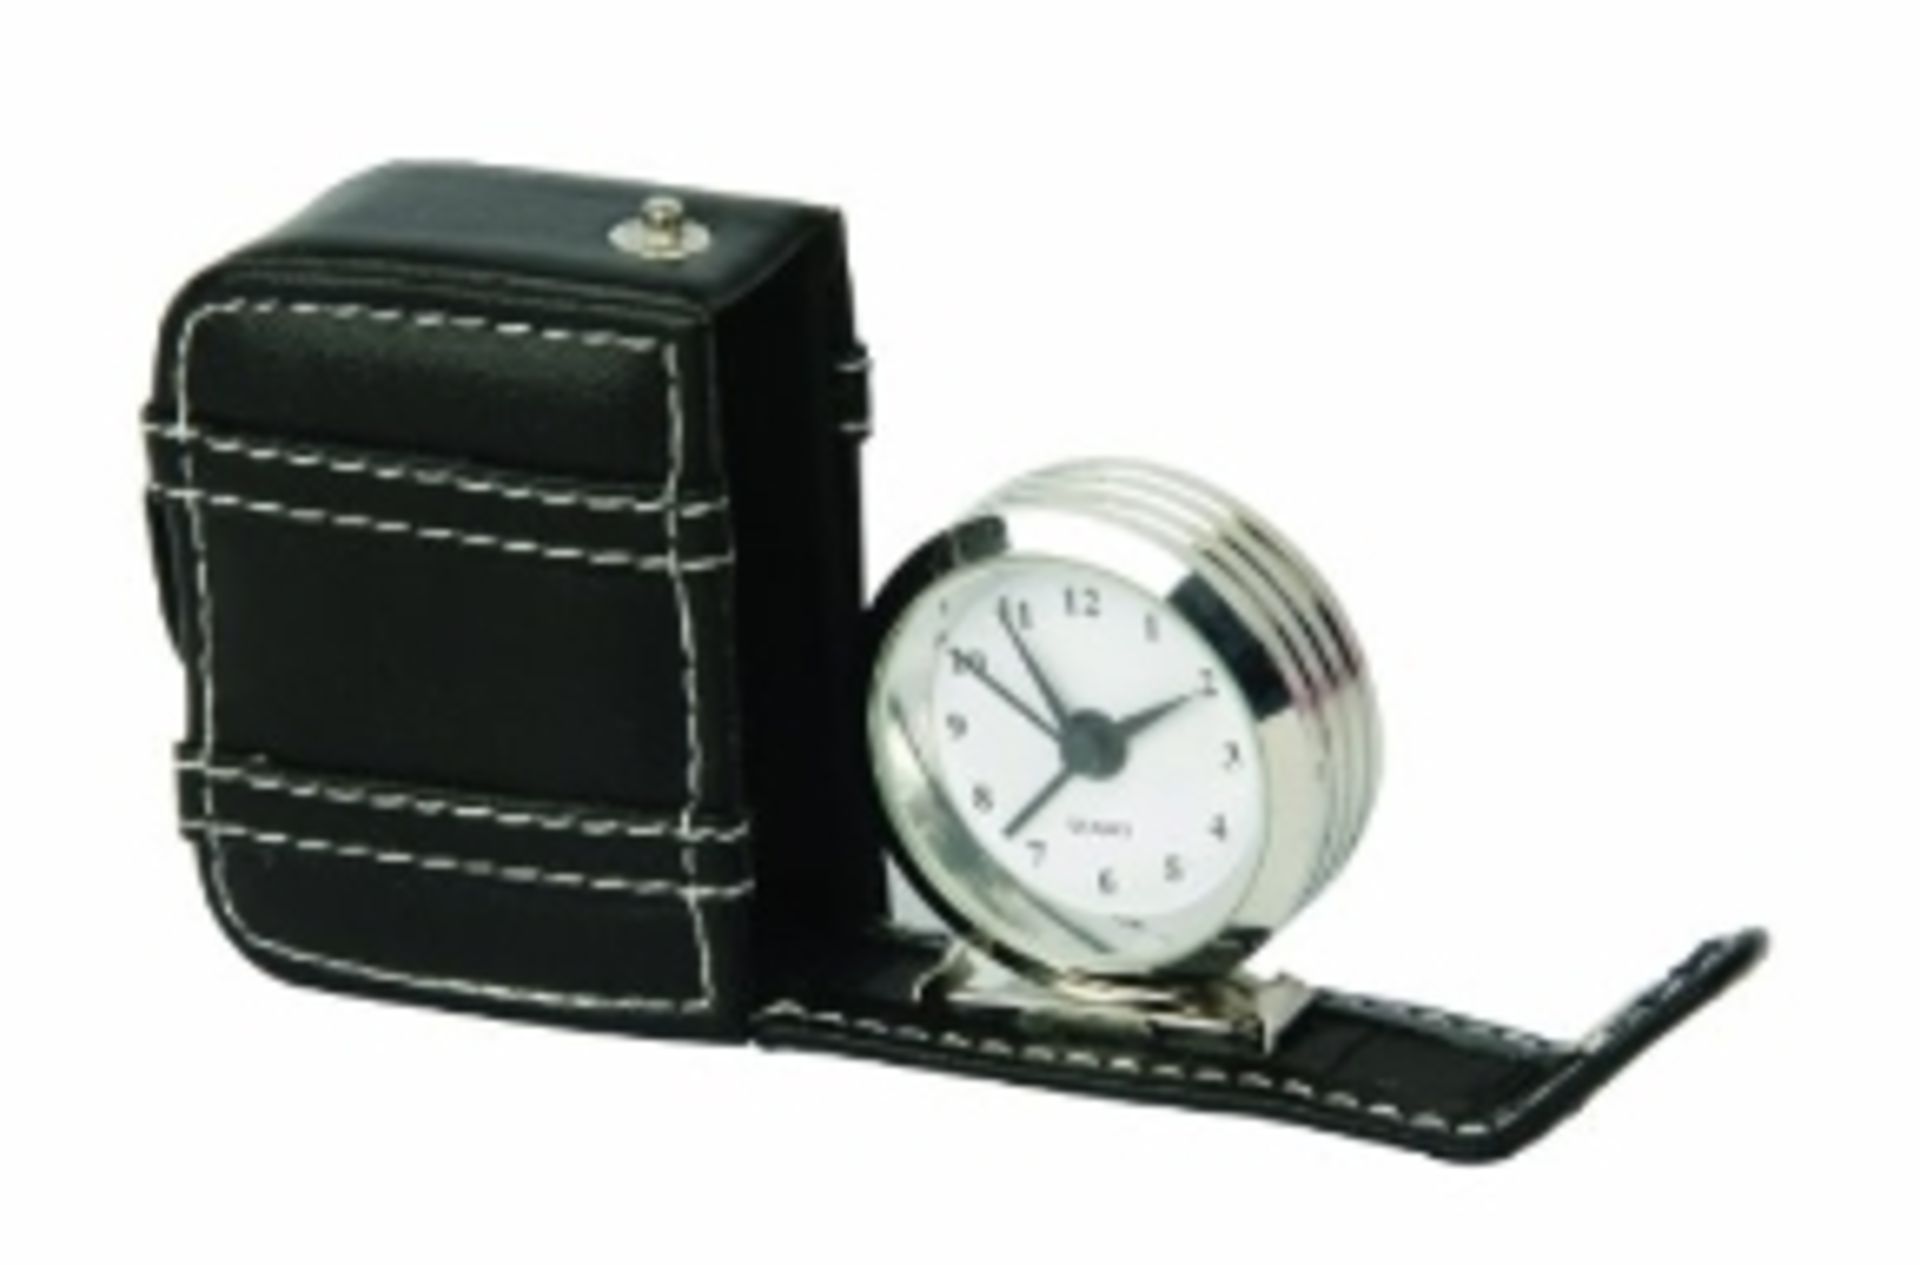 V *TRADE QTY* Brand New Time Goes By Travel Clock £7-49 (Ebay) X 8 YOUR BID PRICE TO BE MULTIPLIED